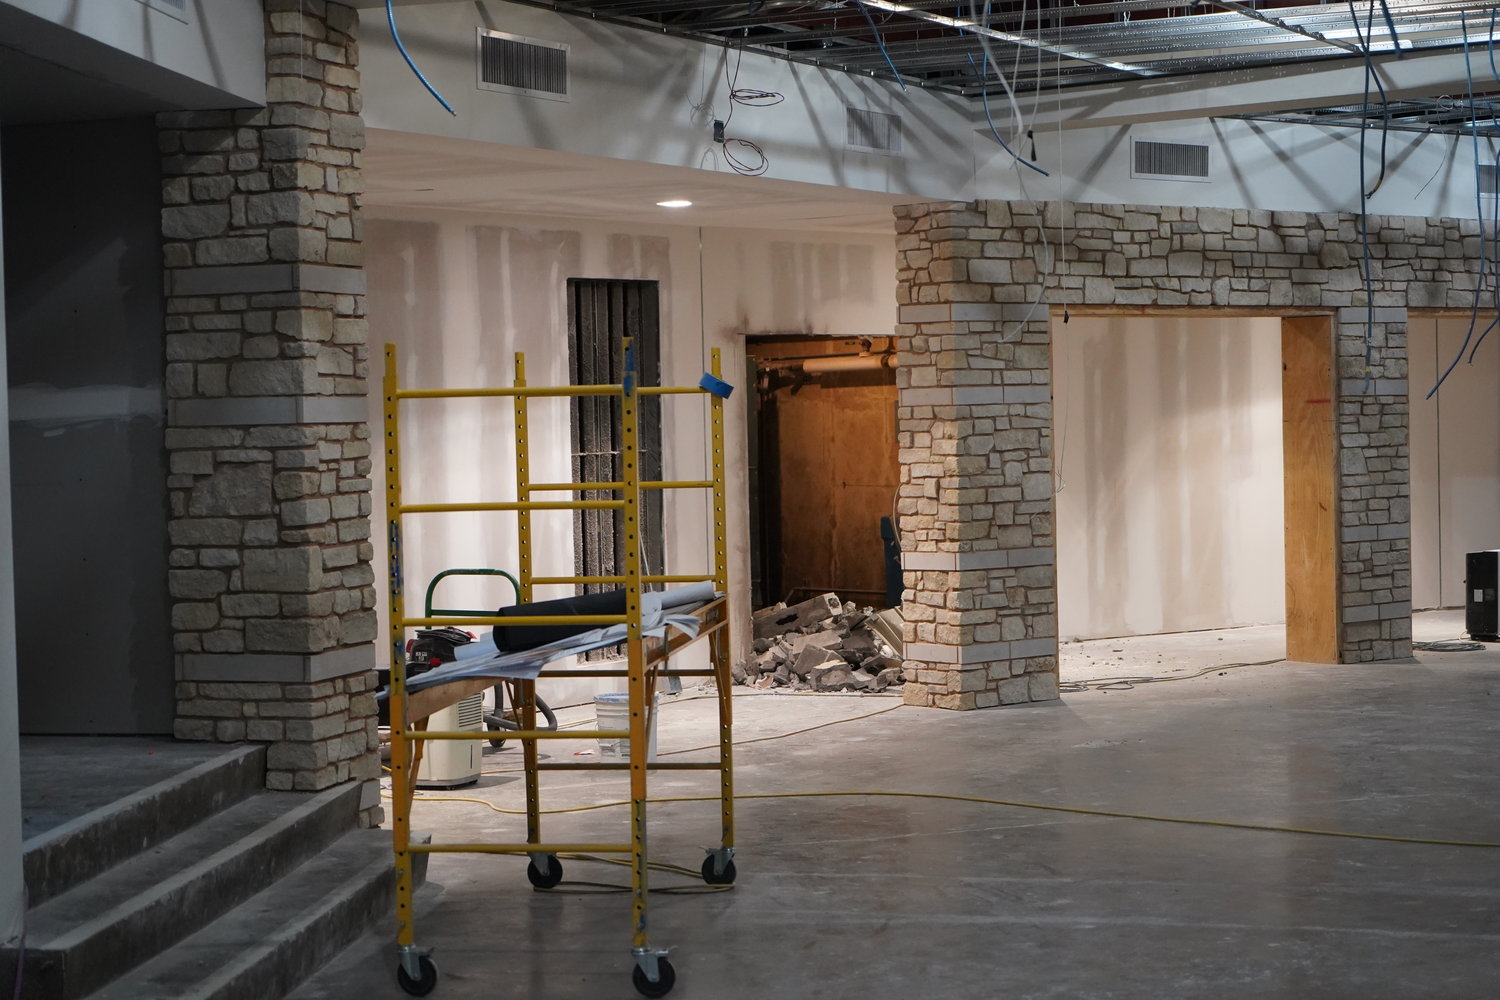 Work progresses on vast improvements to the downstairs Undercroft of the Cathedral of St. Joseph in Jefferson City. The work is part of a yearlong renovation and expansion of the 53-year-old Cathedral to upgrade the building’s aging systems while enhancing its beauty, functionality, capacity for hospitality and uniquely Catholic identity.